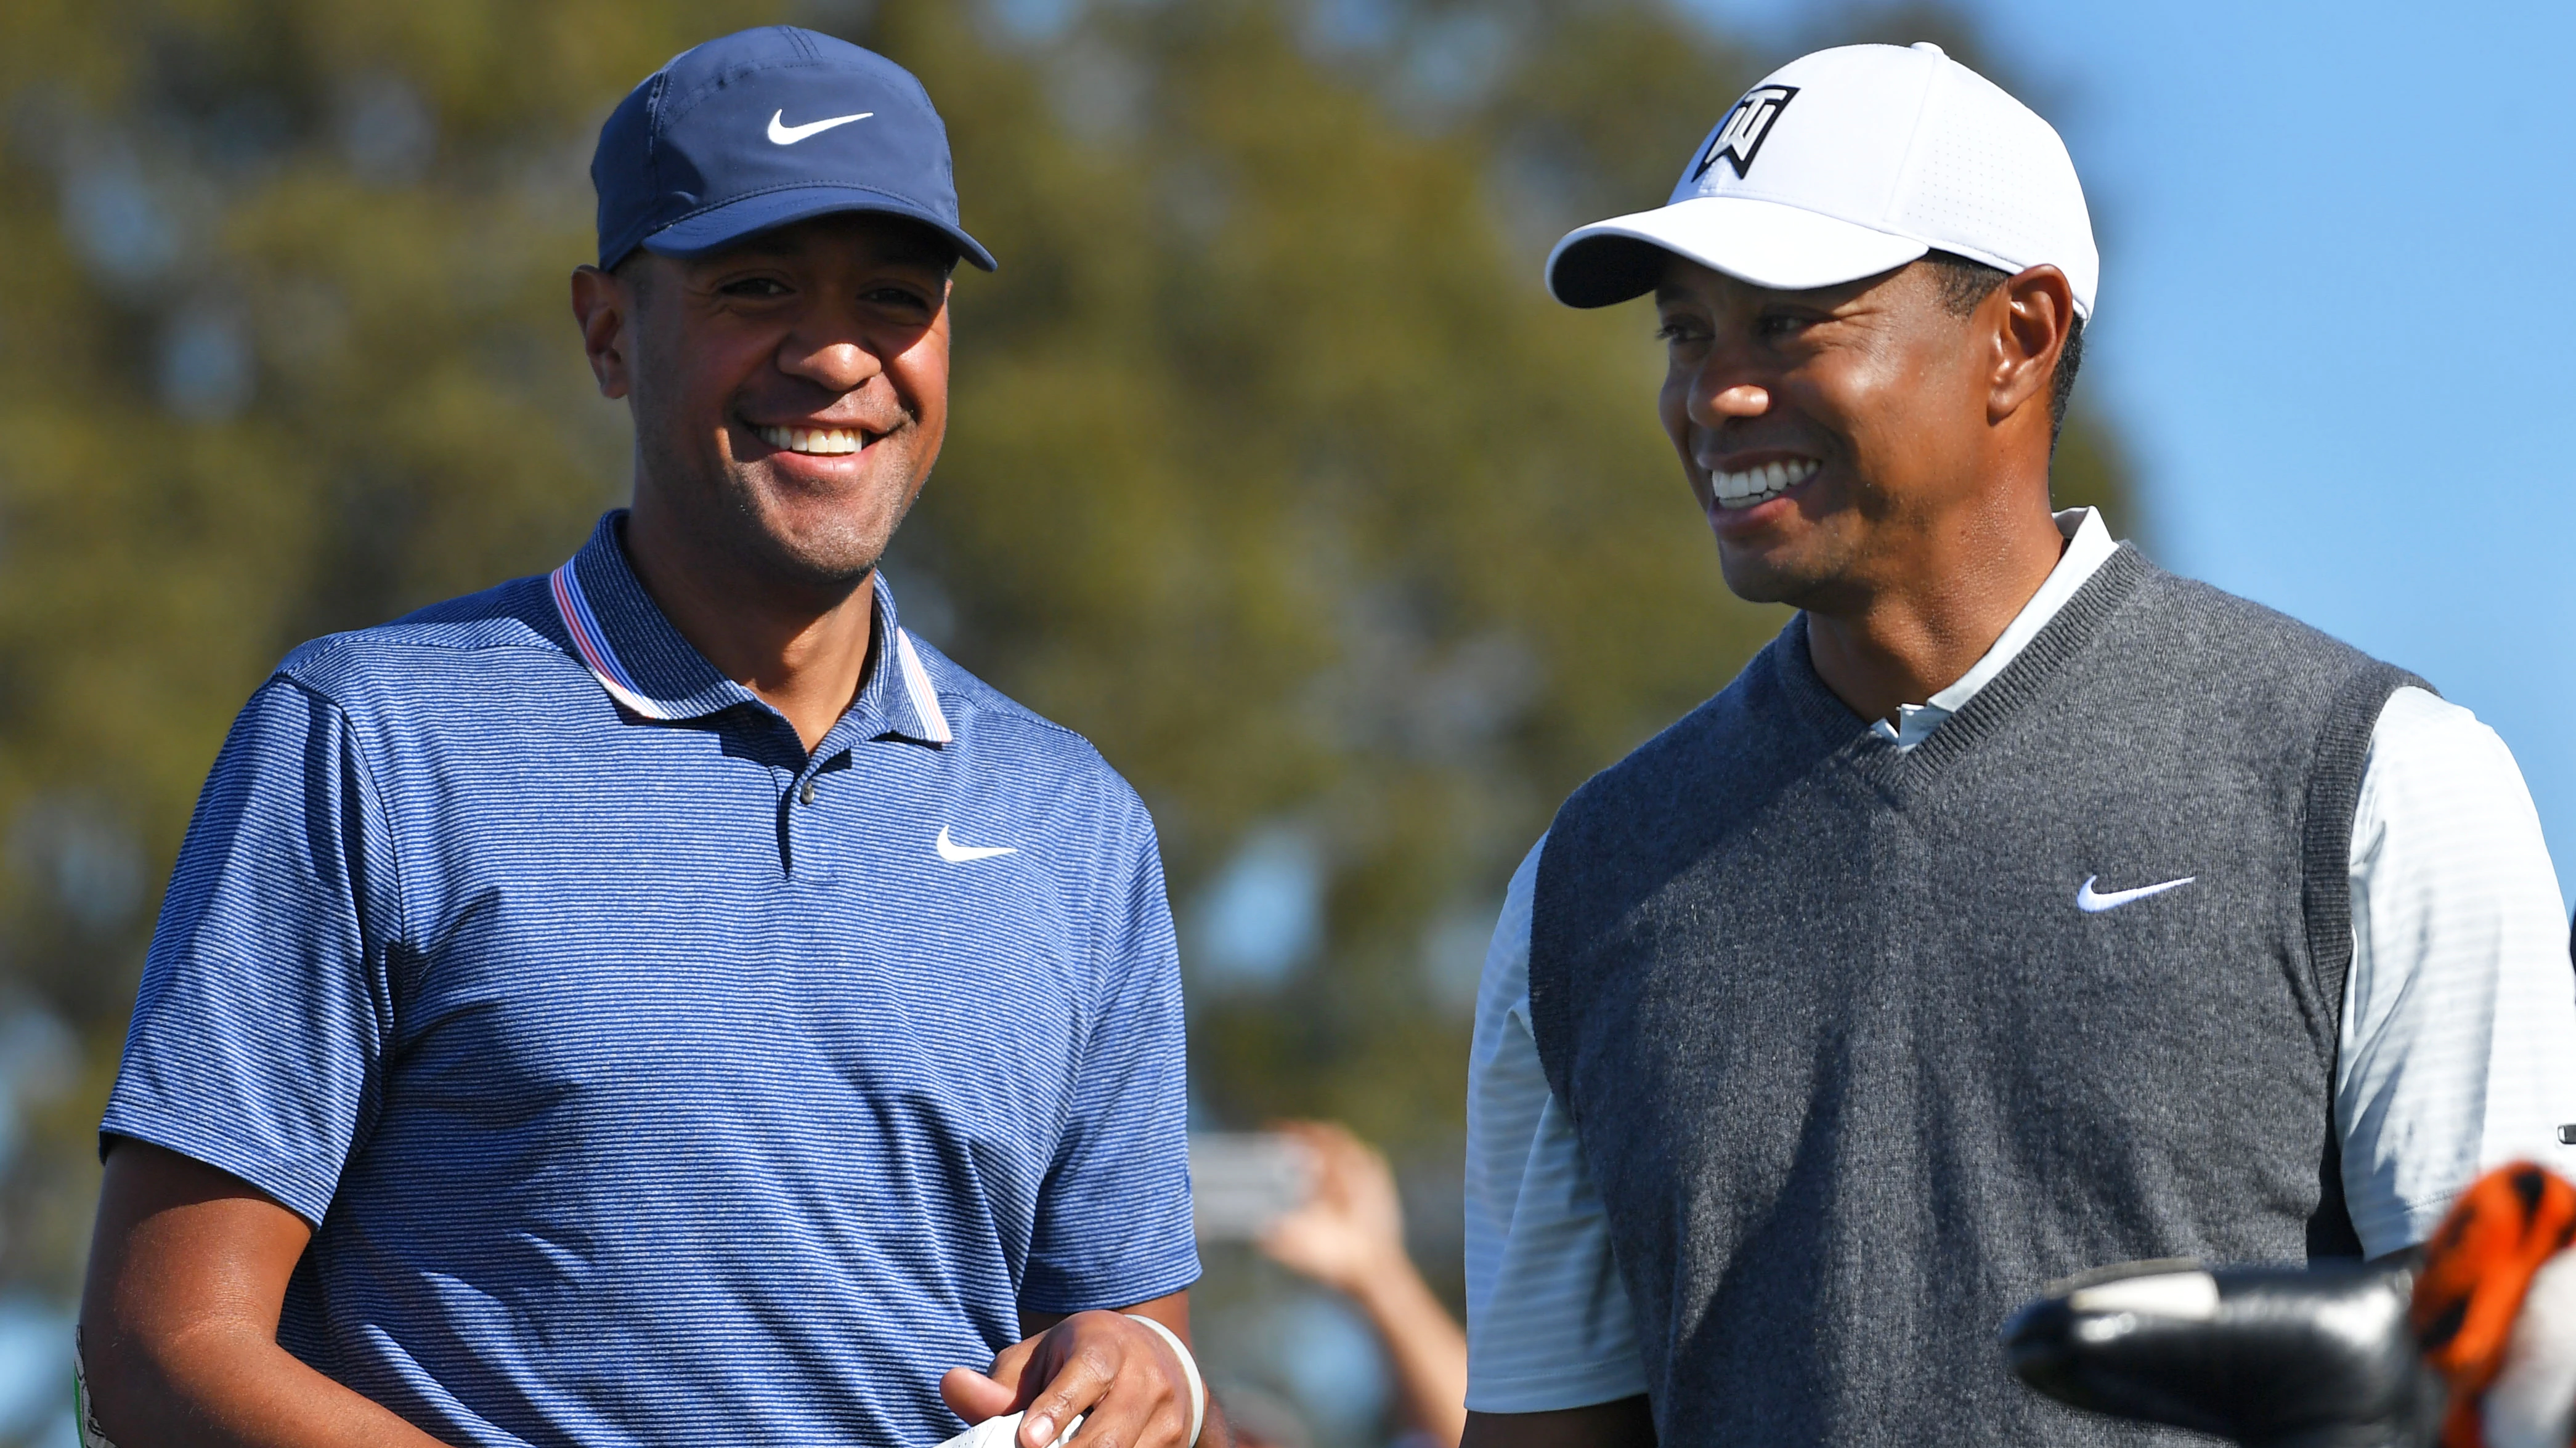 Finau: Sunday grouping with Woods at Augusta a 'dream come true'